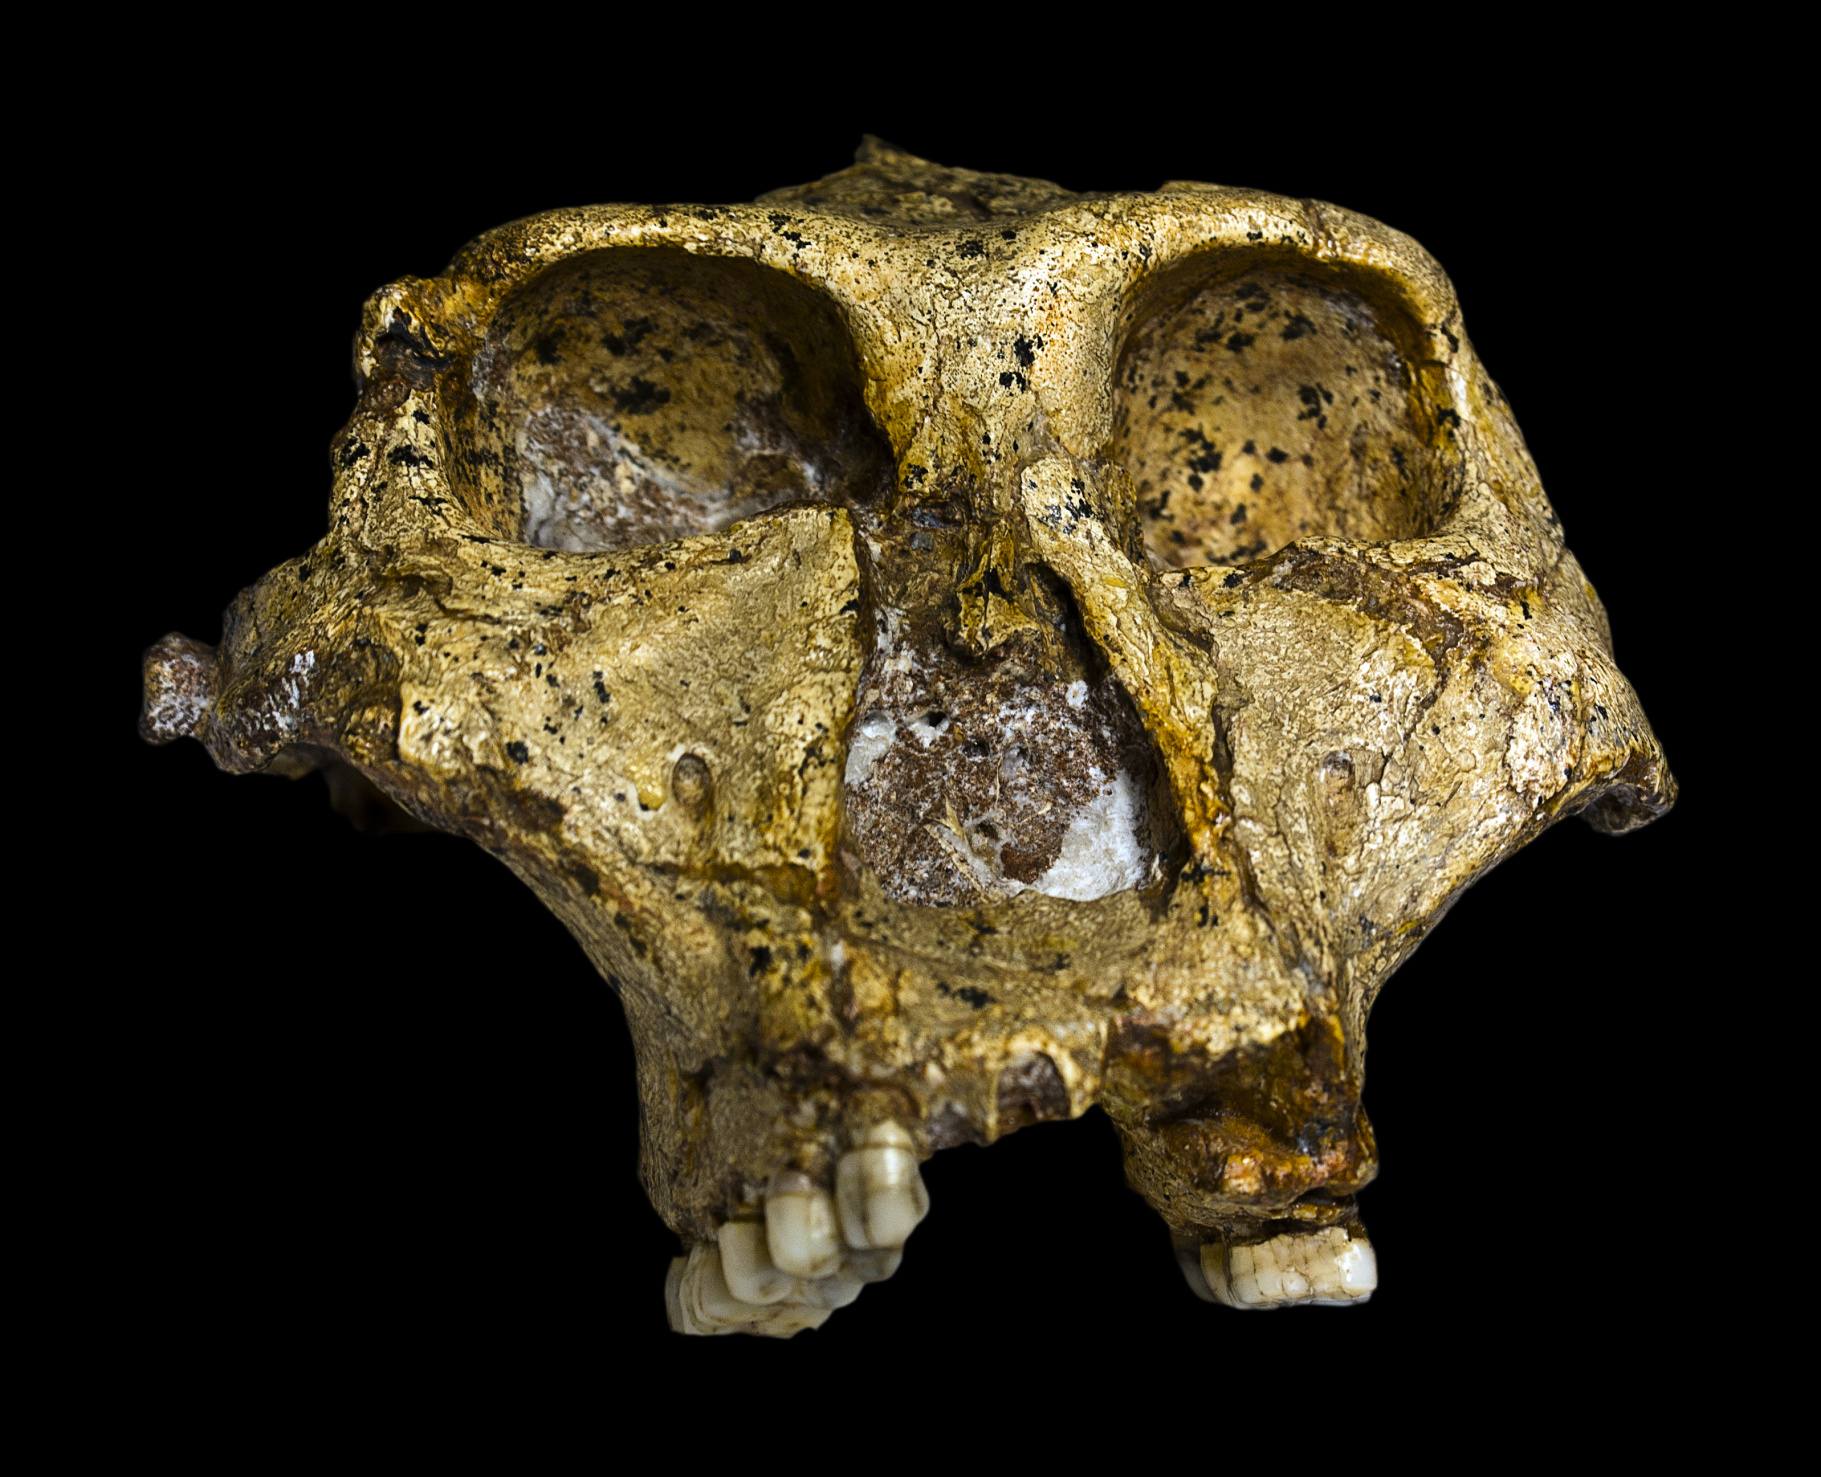 The original complete skull (without mandible) of a 1,8 million years old Paranthropus robustus (SK-48 Swartkrans (26°00'S 27°45'E), Gauteng,), discovered in South Africa . Collection of the Transvaal Museum, Northern Flagship Institute, Pretoria South Africa.